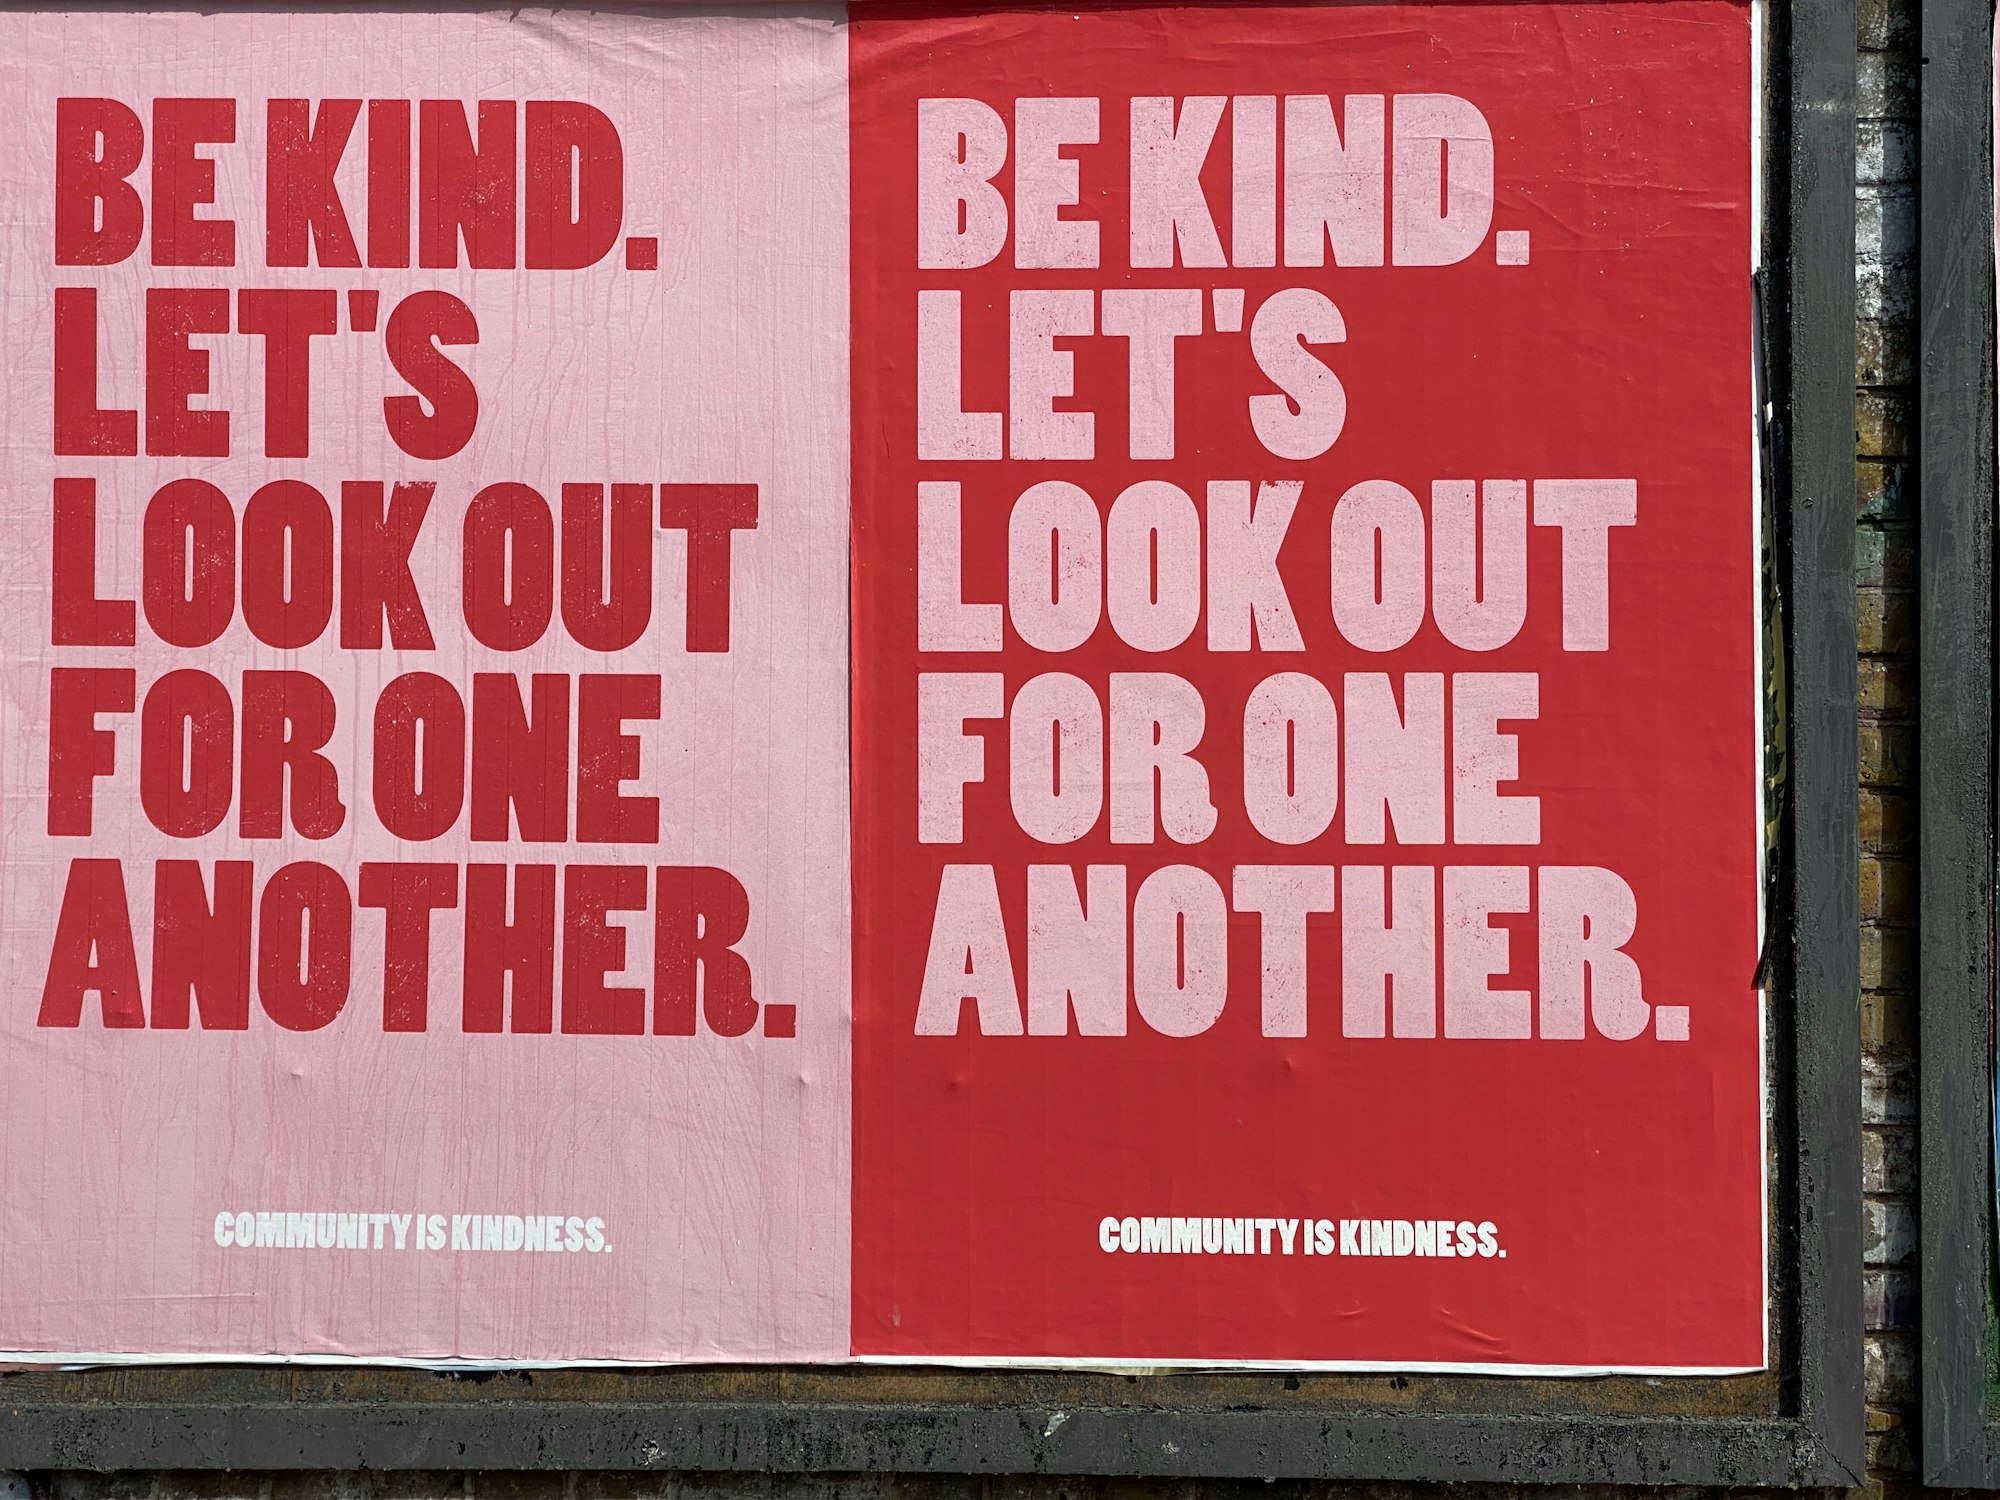 Posters with bold typography reading: "Be kind. Let's look out for one another. Community is kindness."